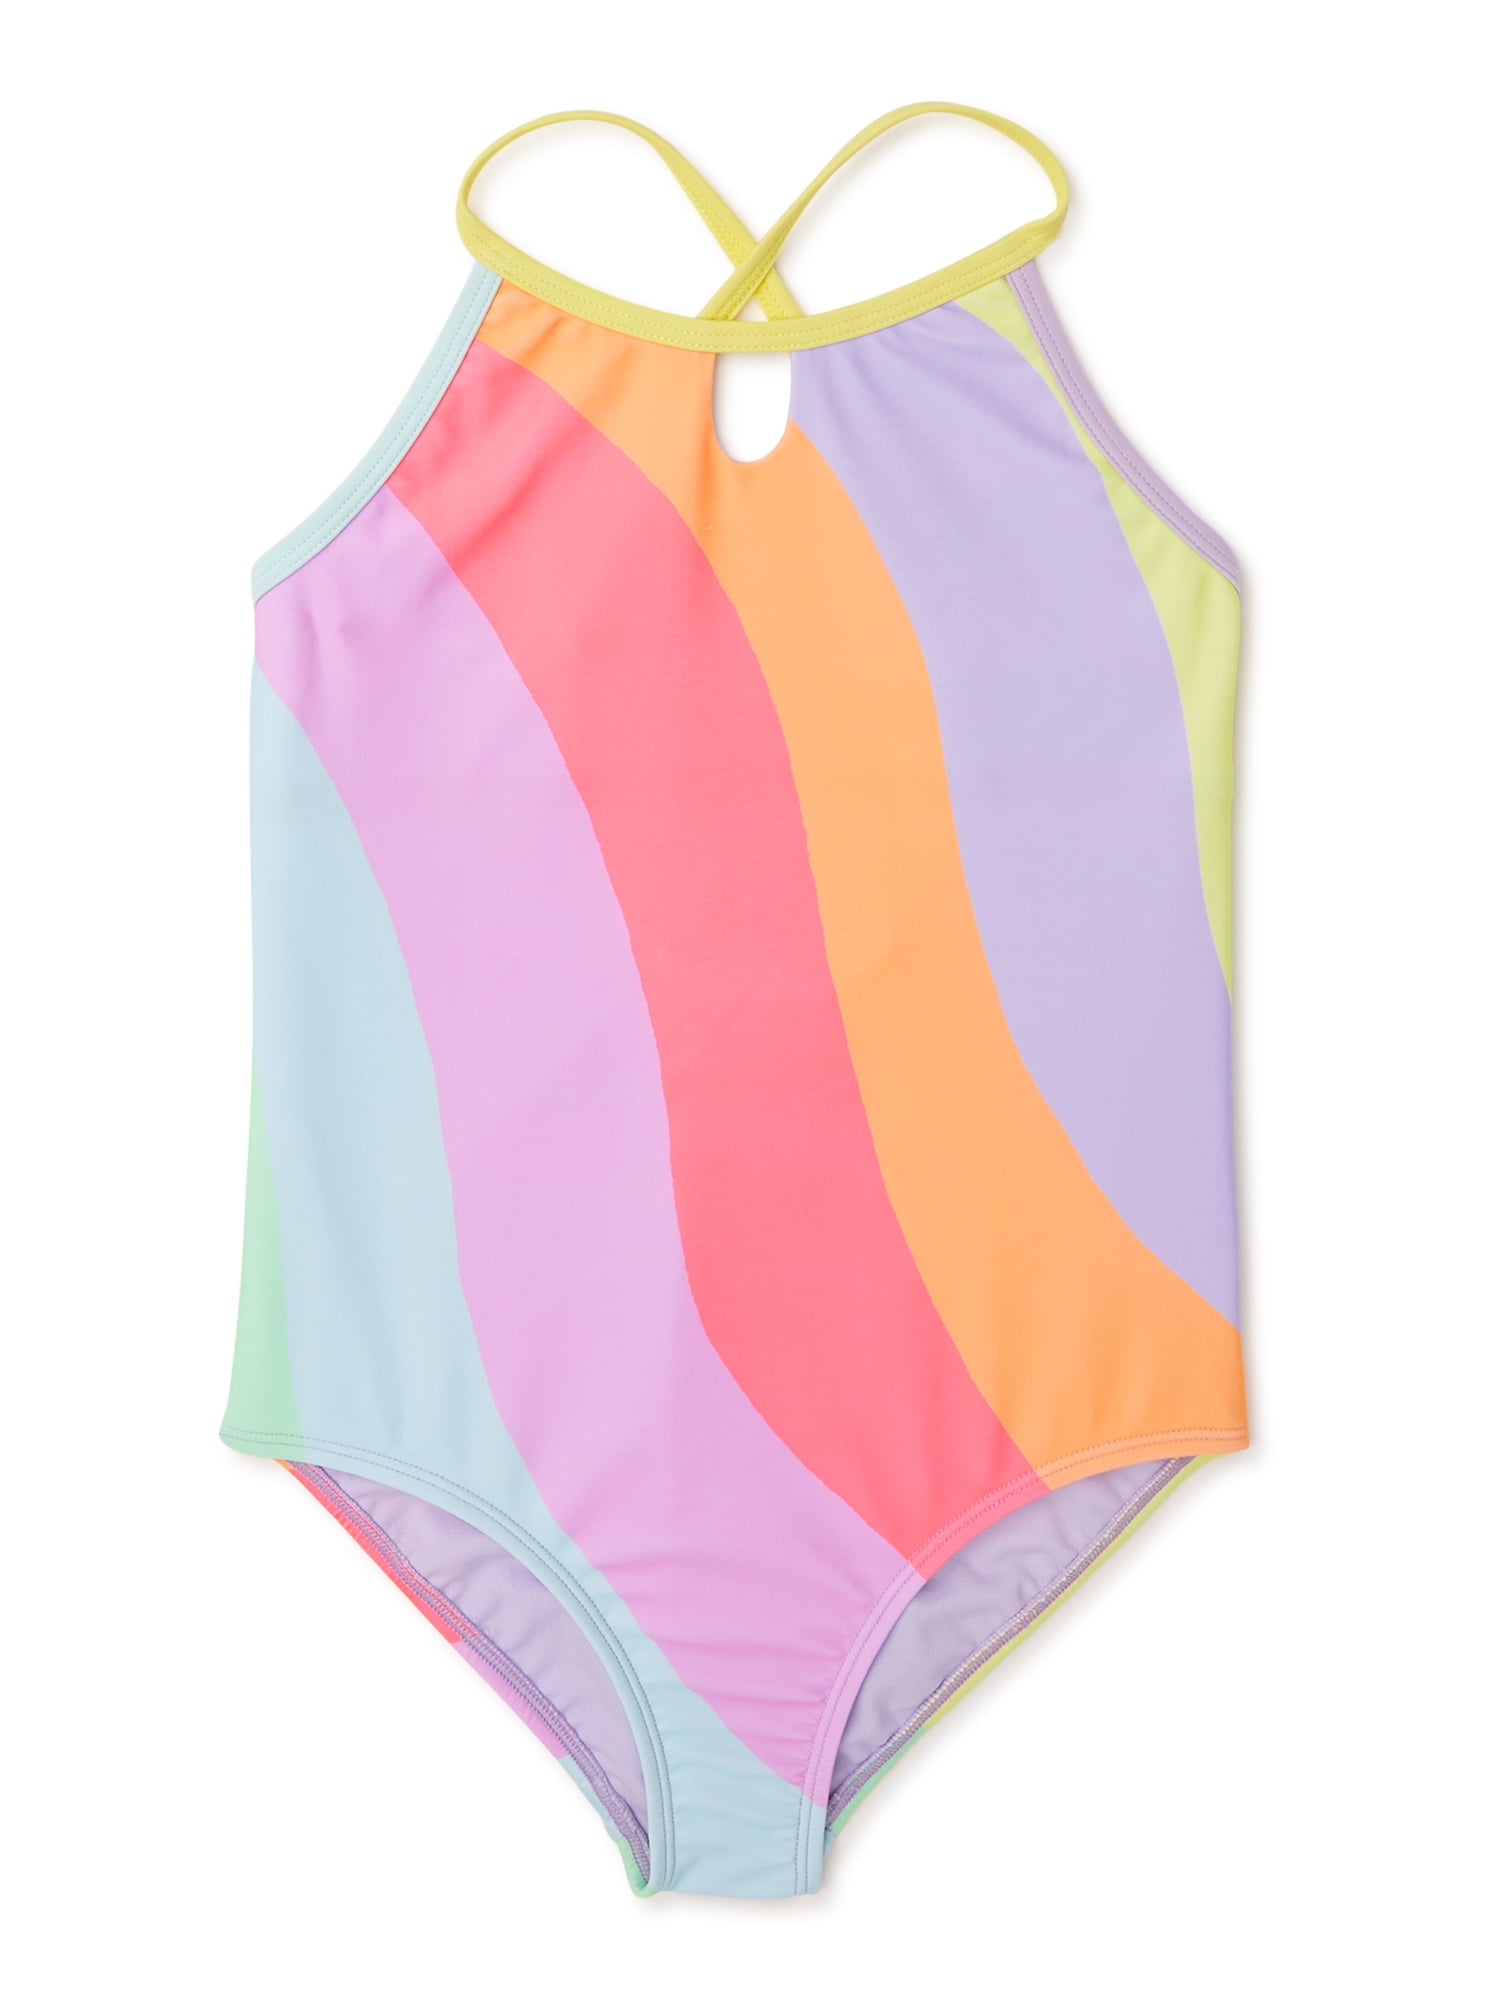 Girls The Children's Place Bathing Swim Suit 4 Colours Size 6-11 Years Old 